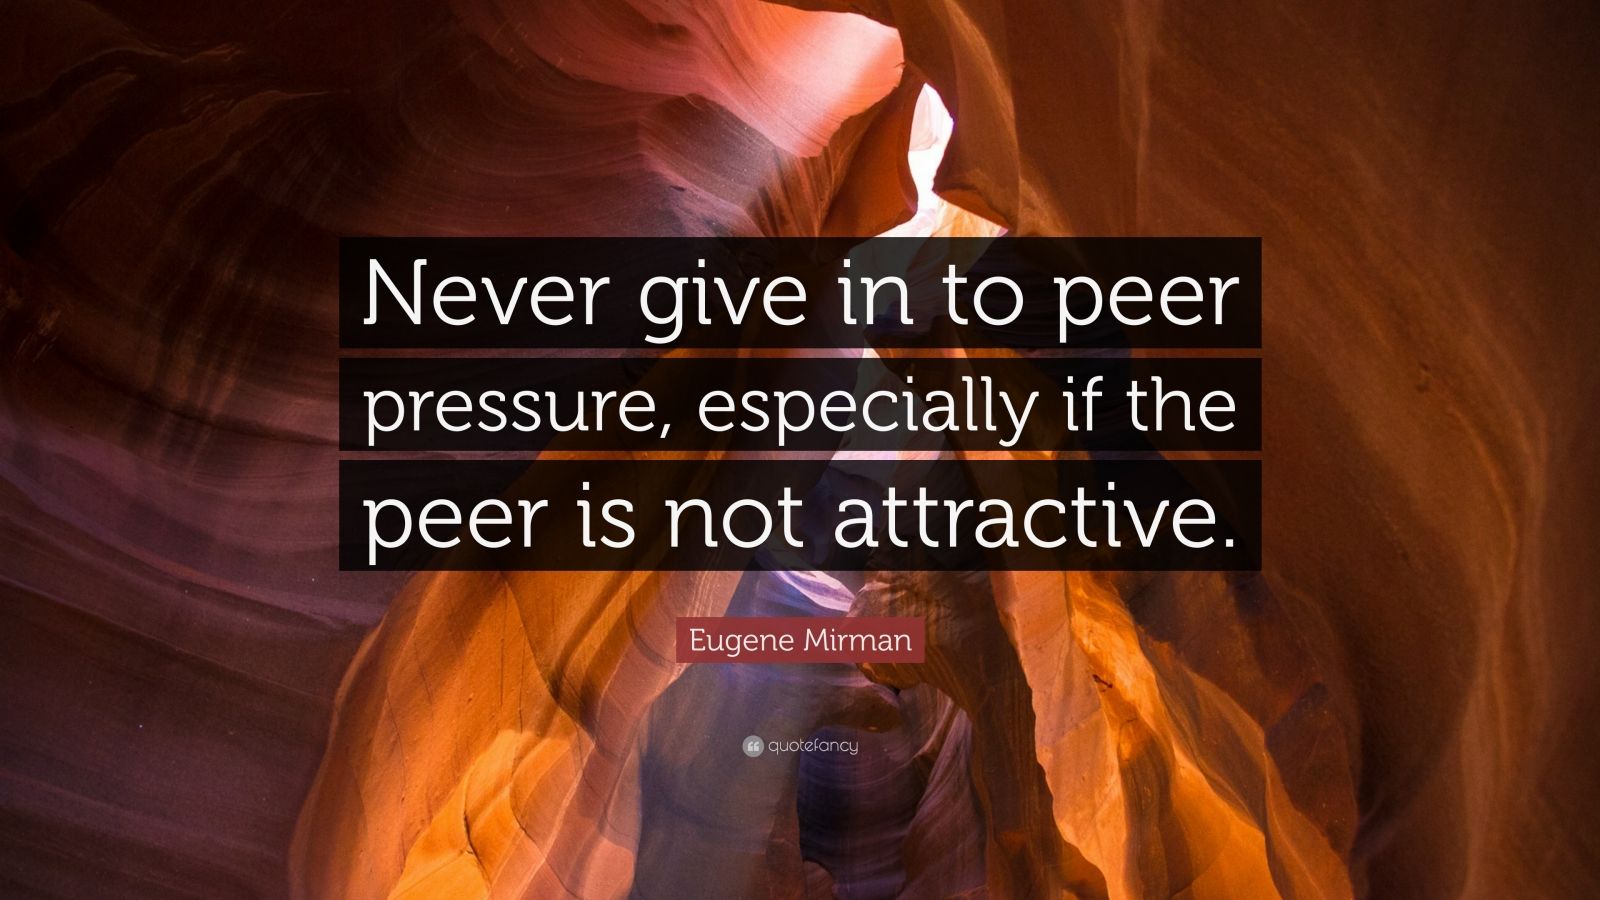 Eugene Mirman Quote “never Give In To Peer Pressure Especially If The Peer Is Not Attractive” 5774